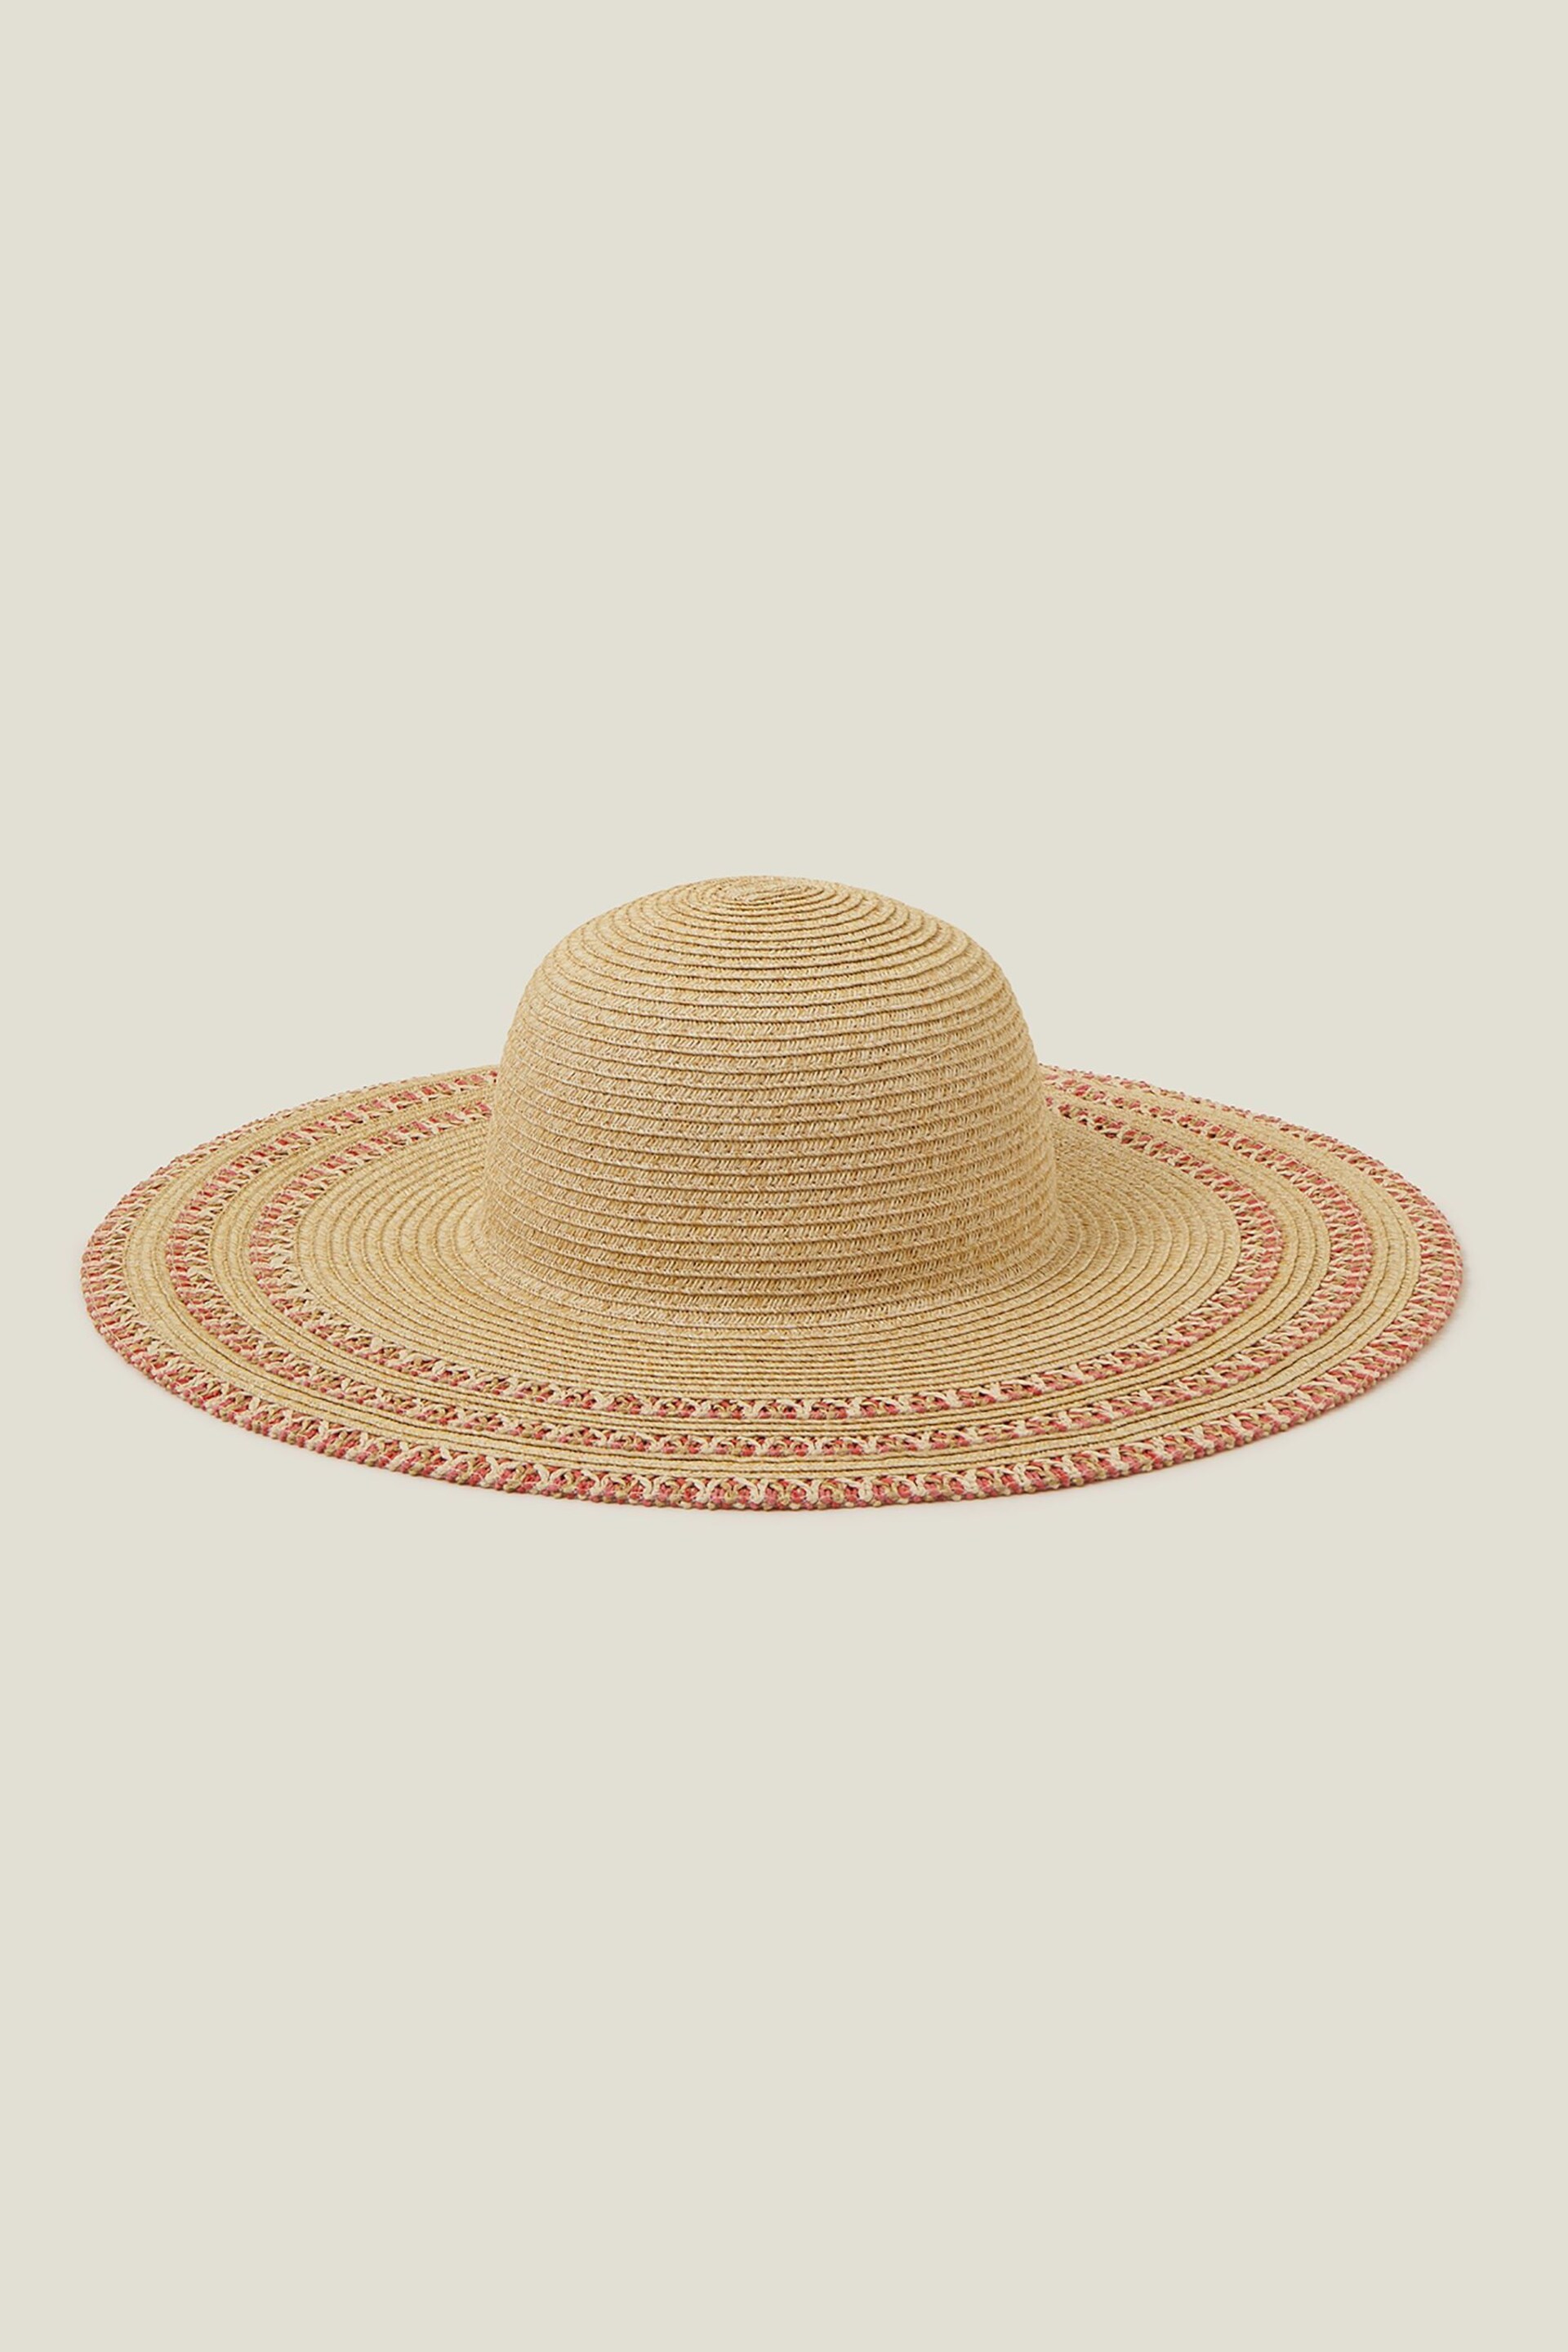 Accessorize Natural Braided Edge Floppy Hat - Image 1 of 3